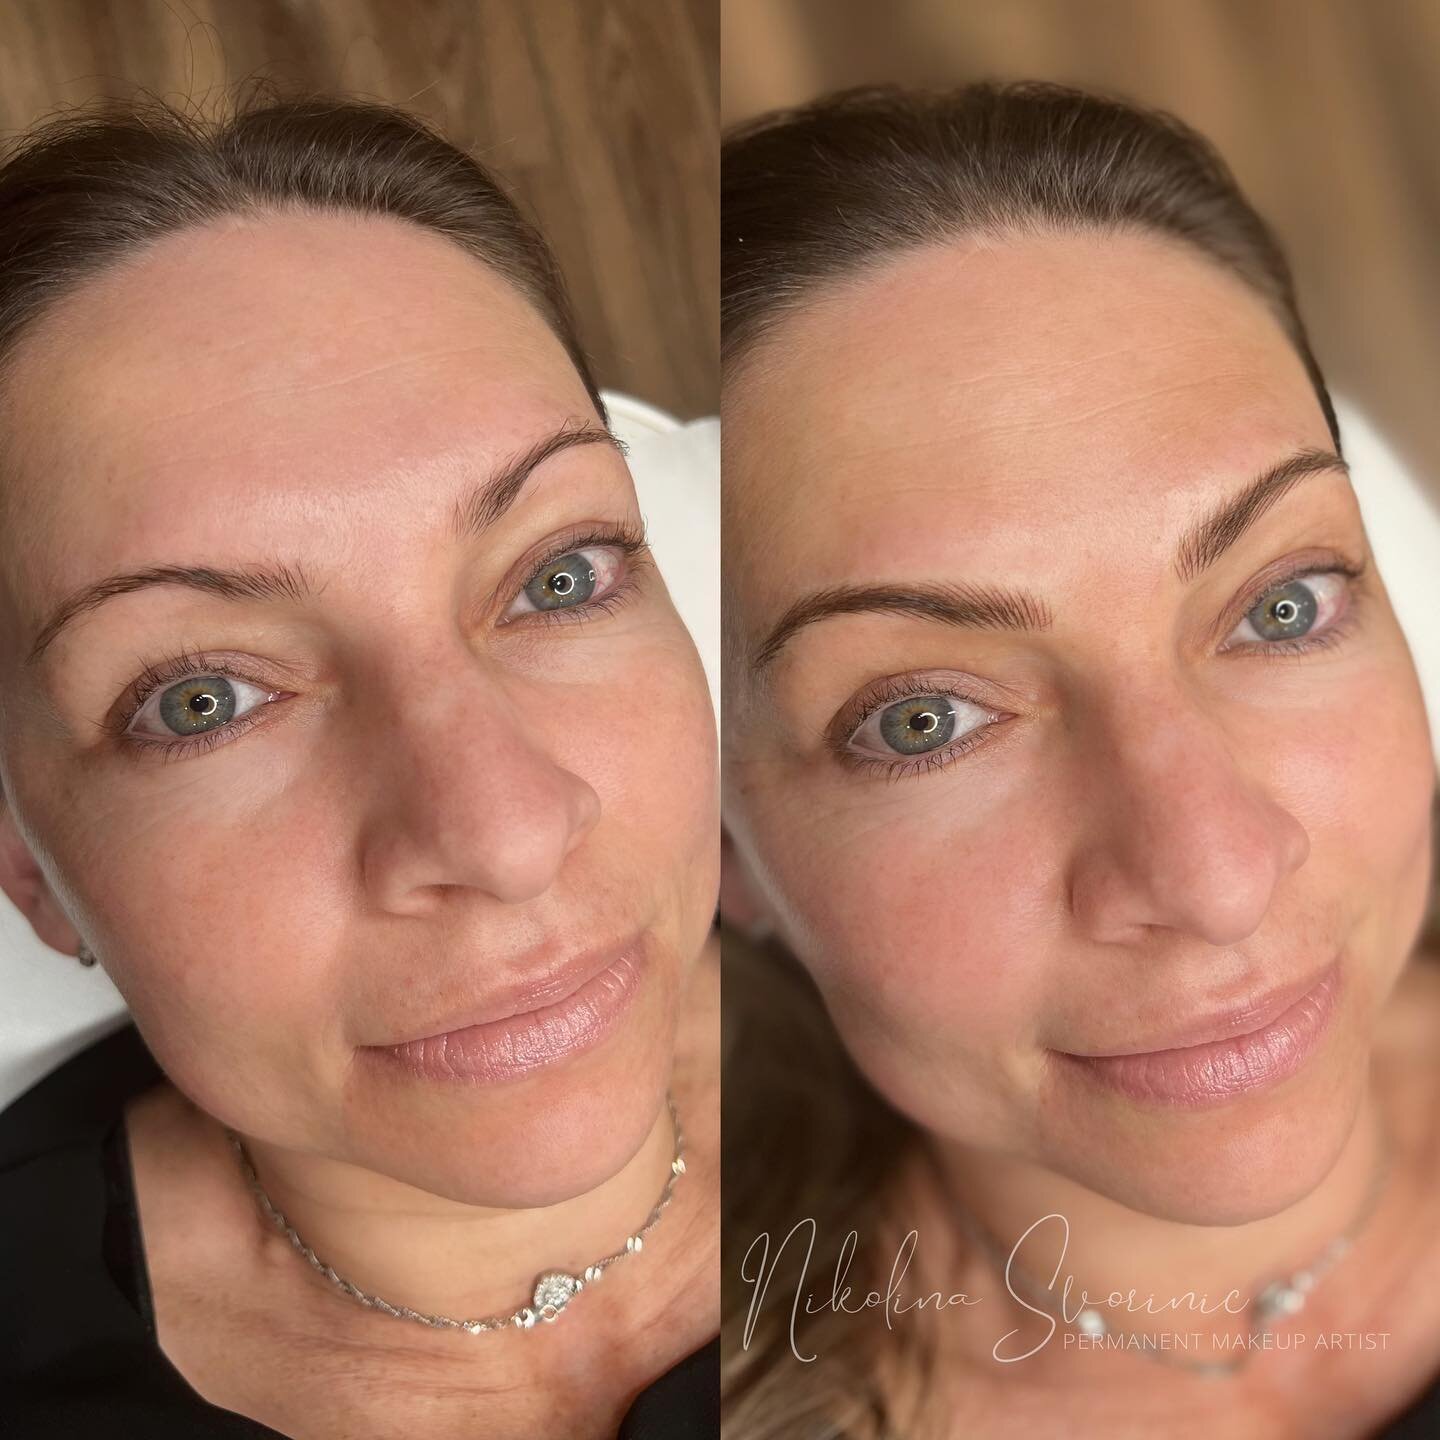 Nano brows on our beautiful Diana 💗 We had the best morning together! 

She came in fully trusting me and the process and she left feeling confident and even more beautiful 😍 Can&rsquo;t wait to do your lash line next! 

Now she has some great brow